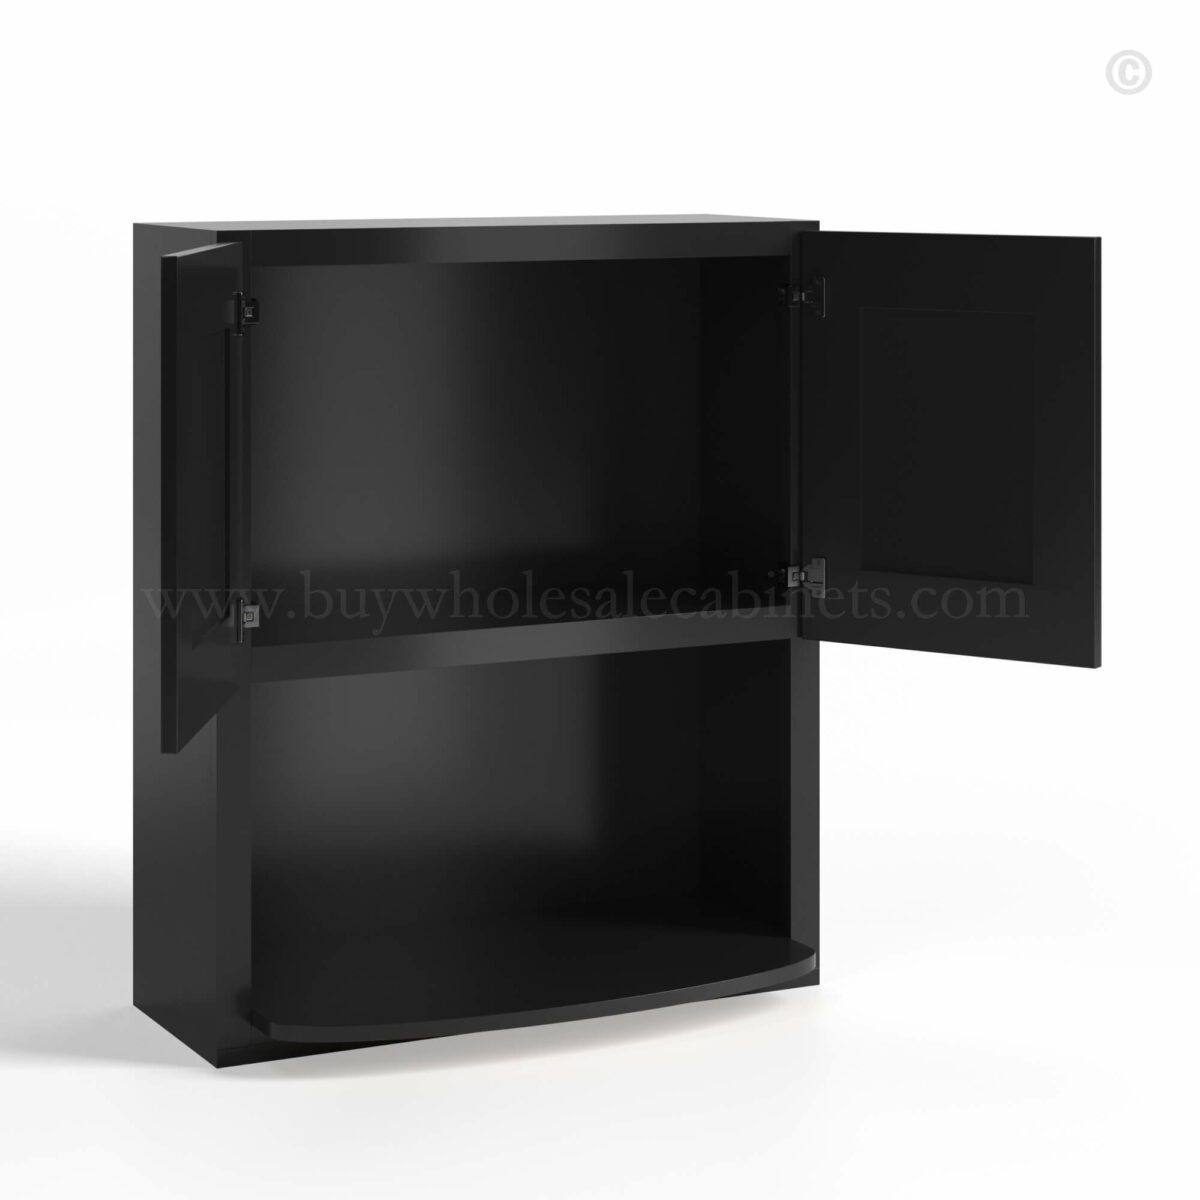 Black Shaker Wall Microwave Cabinet, rta cabinets, wholesale cabinets